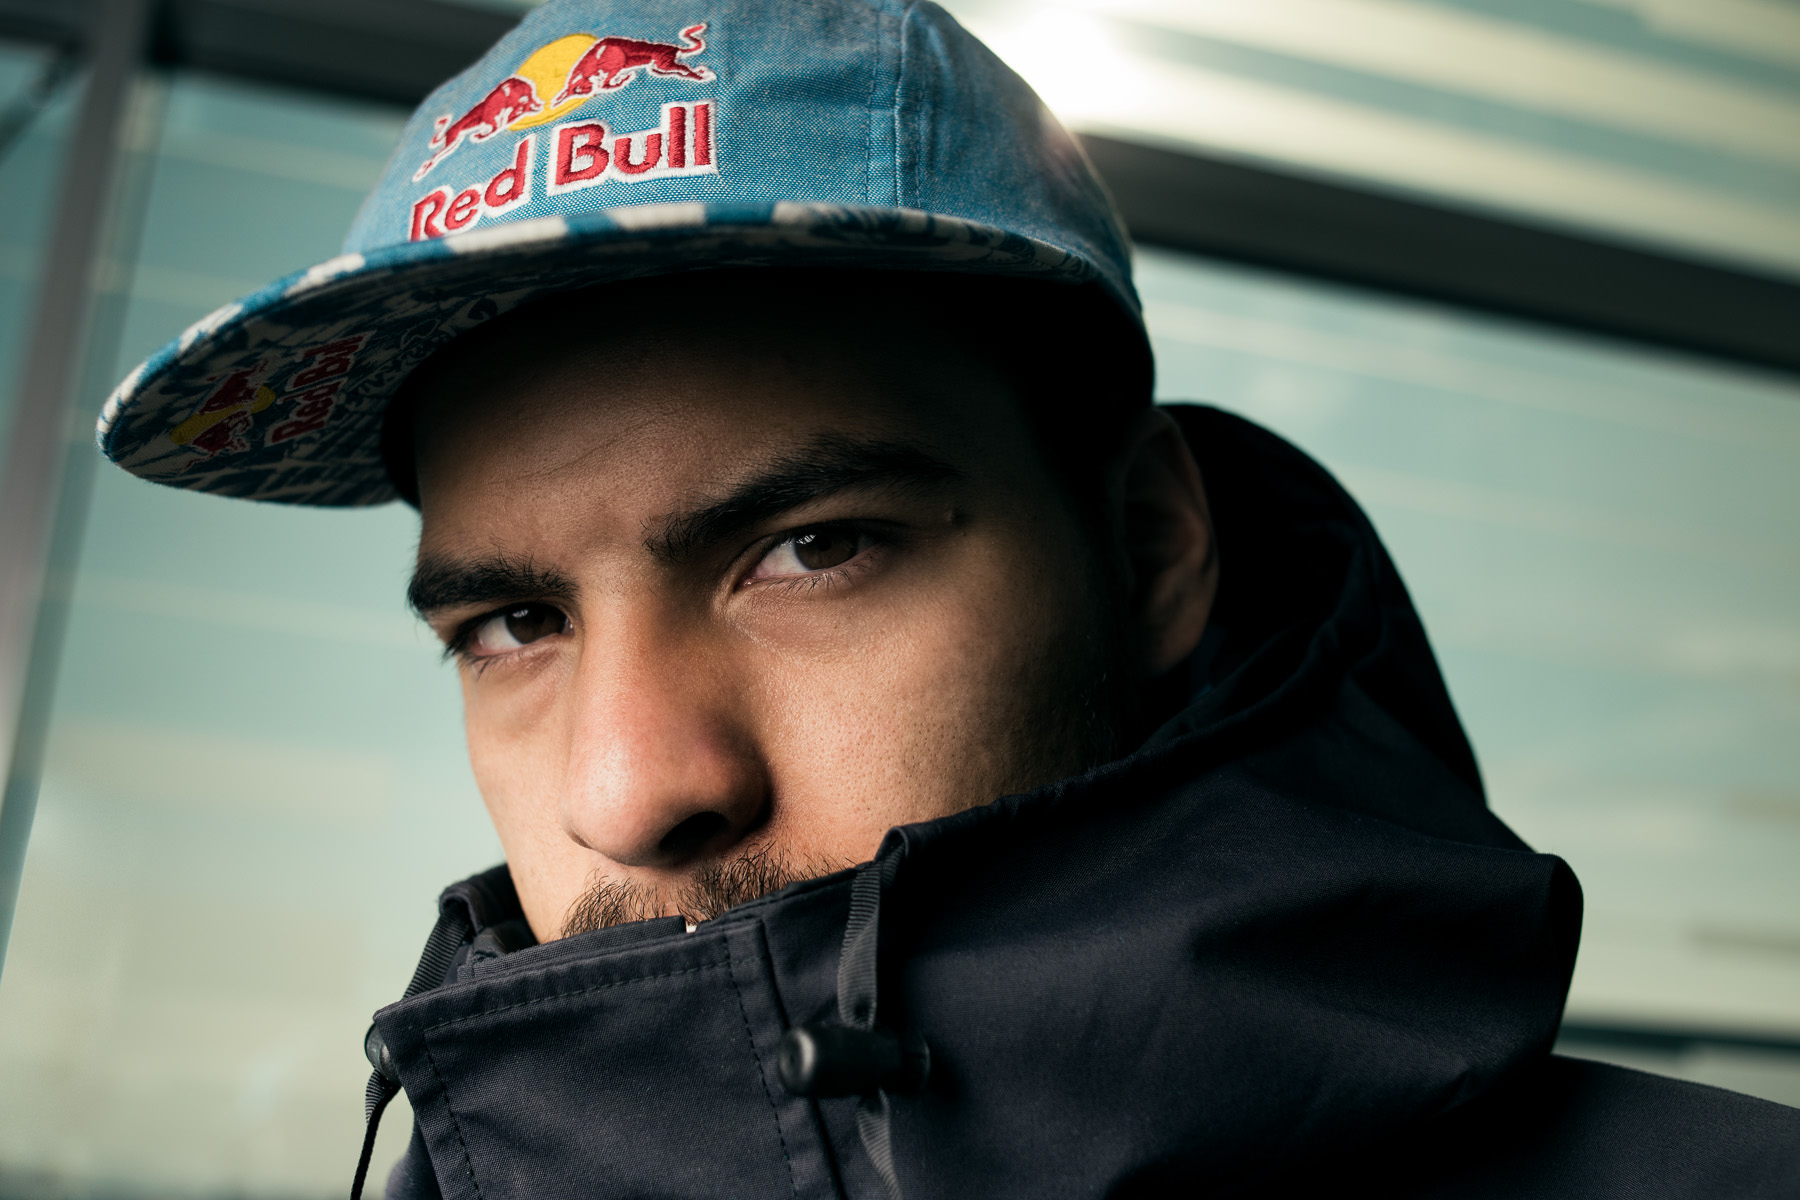 How Winning a Red Bull Photo Challenge Changed Leo Rosas' Life